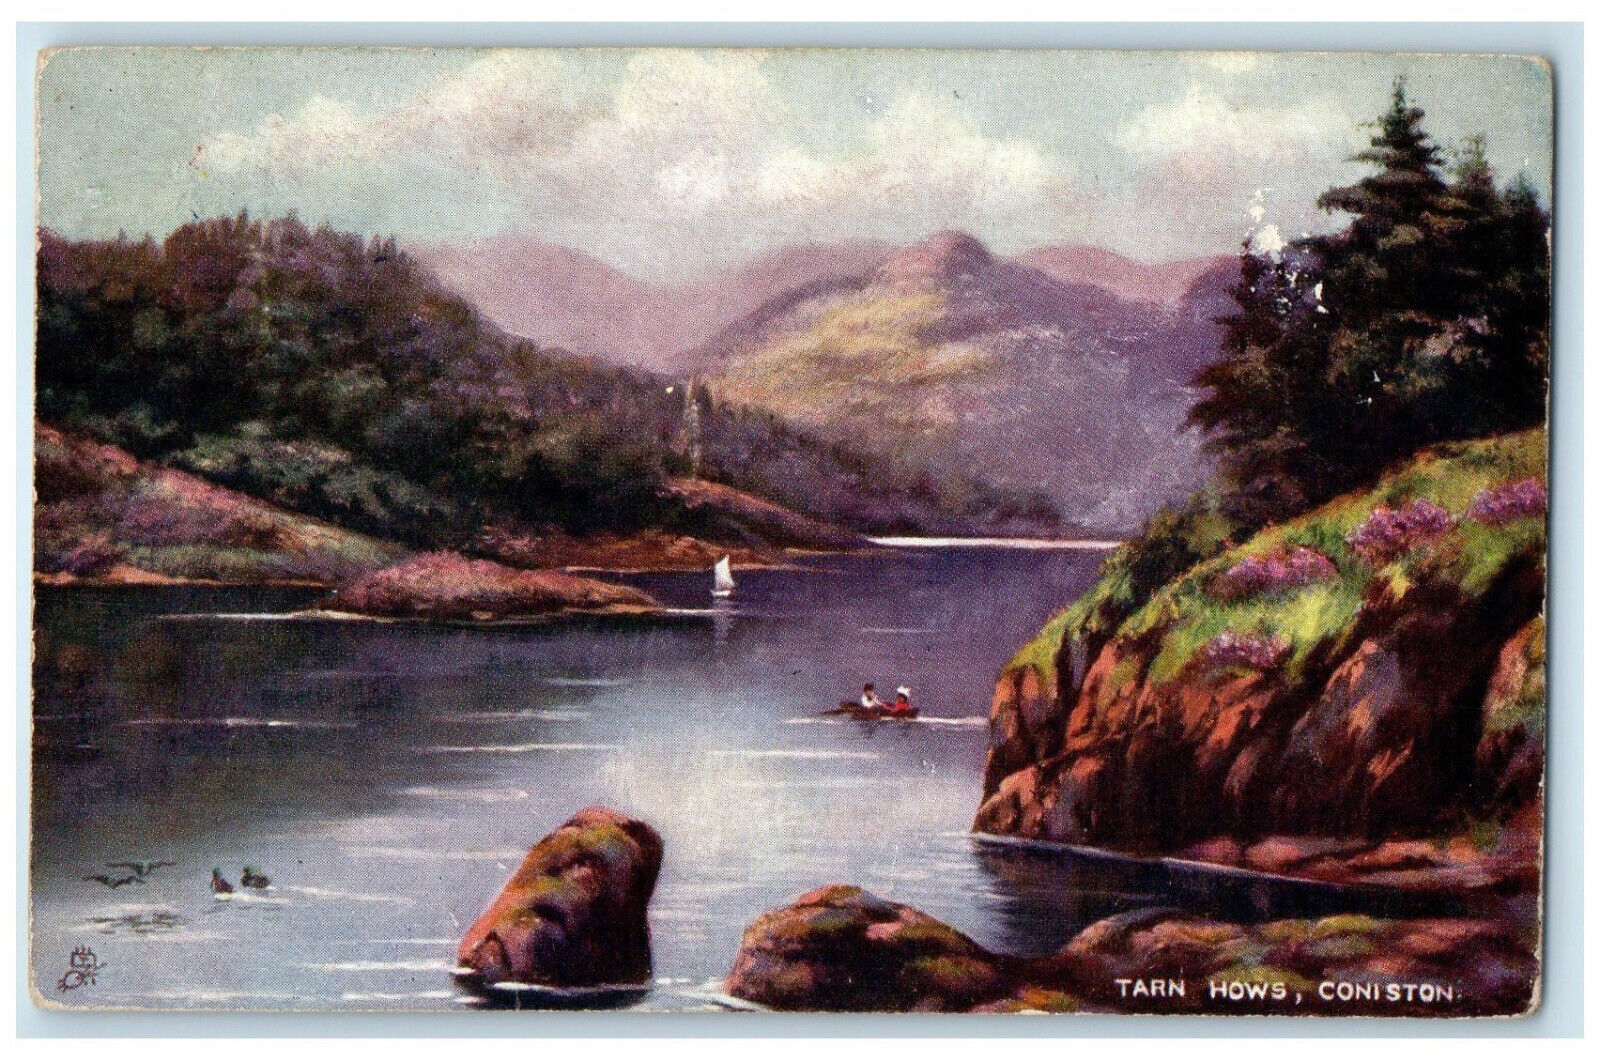 c1910 Tarn Hows Coniston Picturesque Lakes England Oilette Tuck Art Postcard